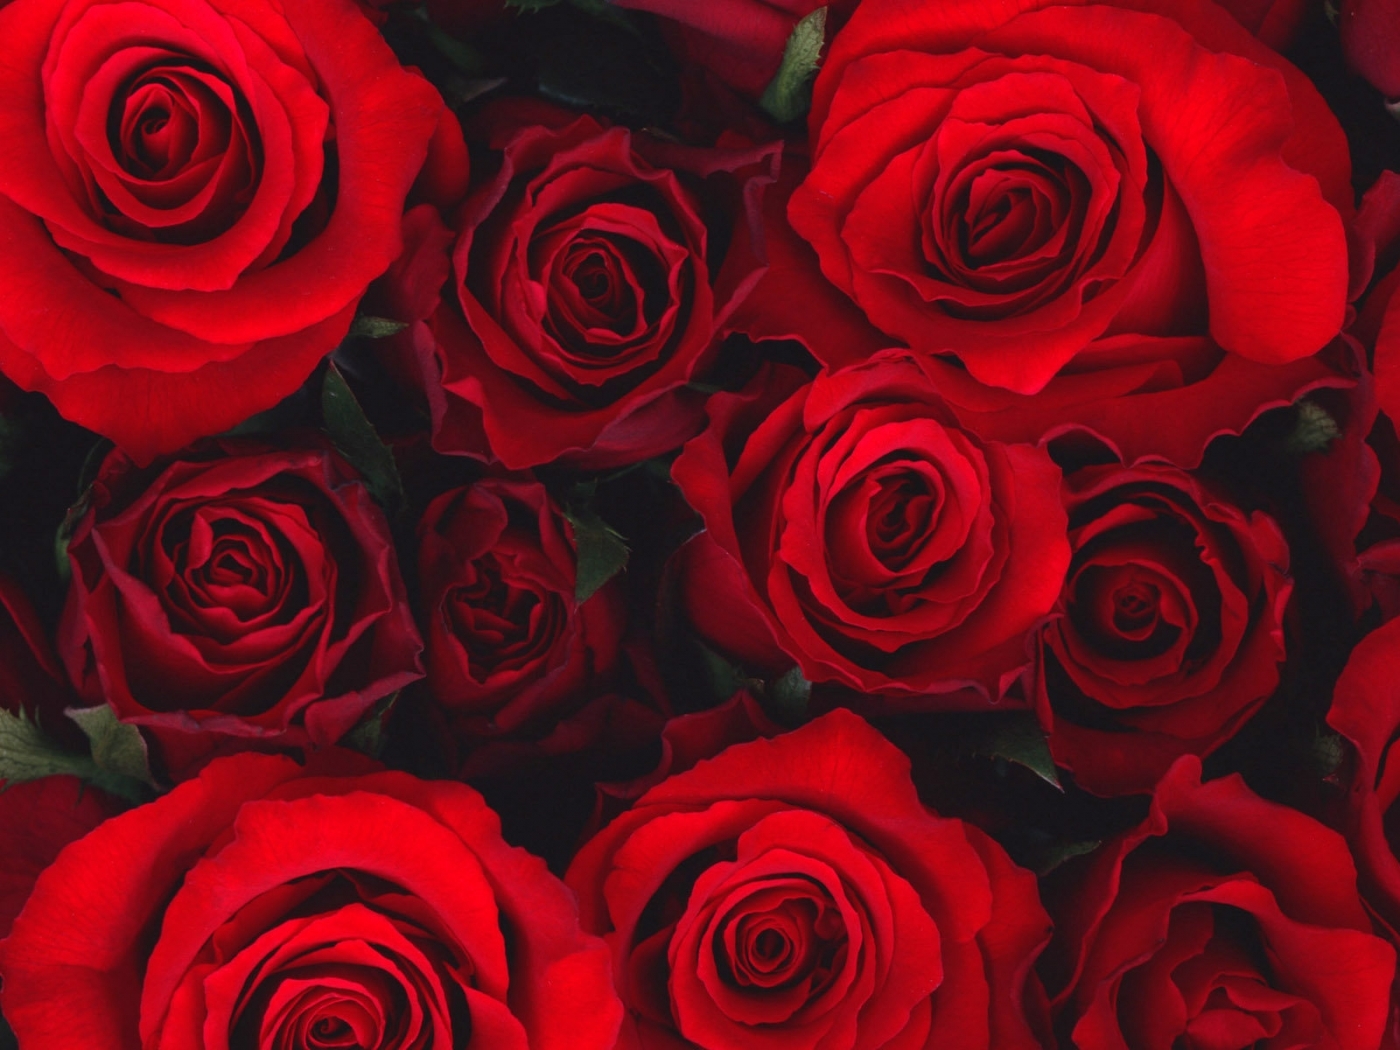 flowers, roses, pictures, red Image for desktop